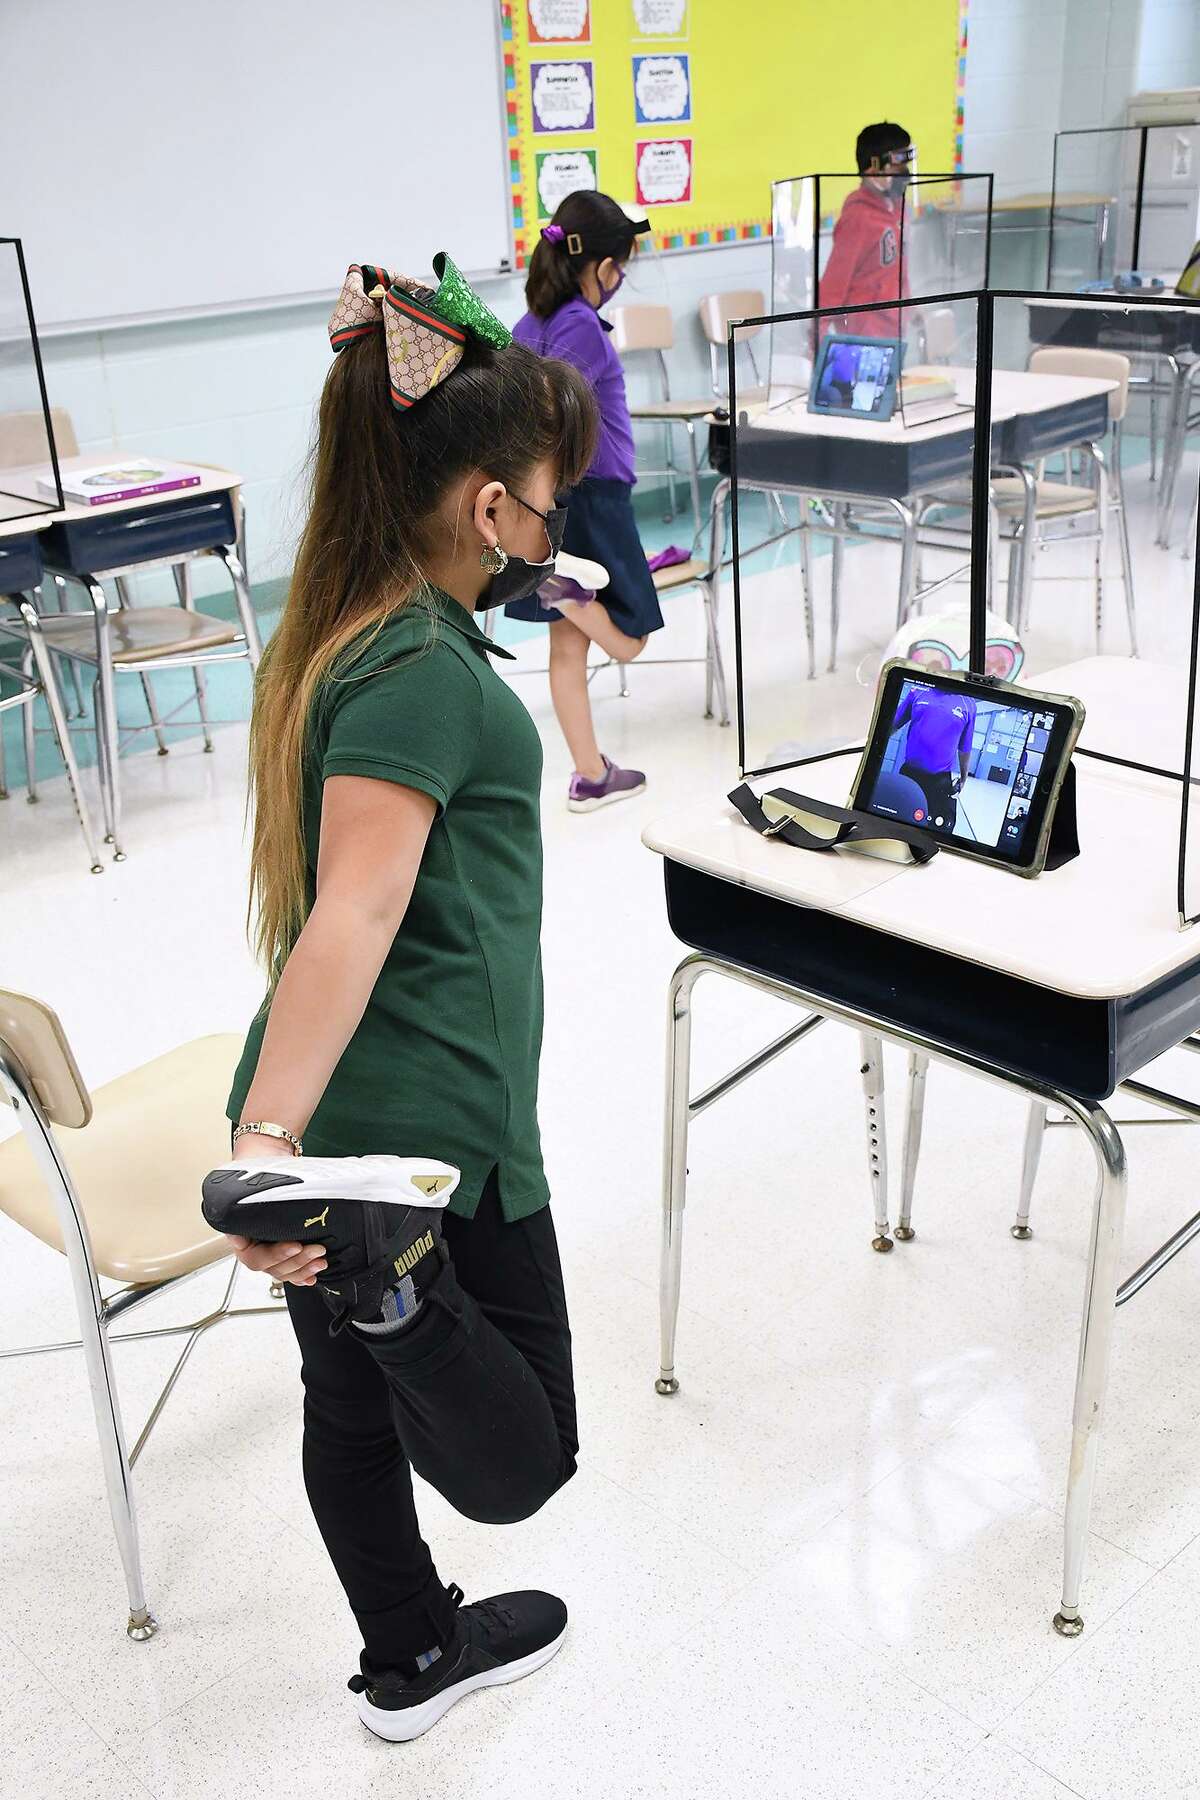 Laredo ISD students in third, fourth, fifth, sixth, and ninth grades, and all Special Education Self-Contained were allowed to participate in in-person classroom learning Monday, September 21, 2020.